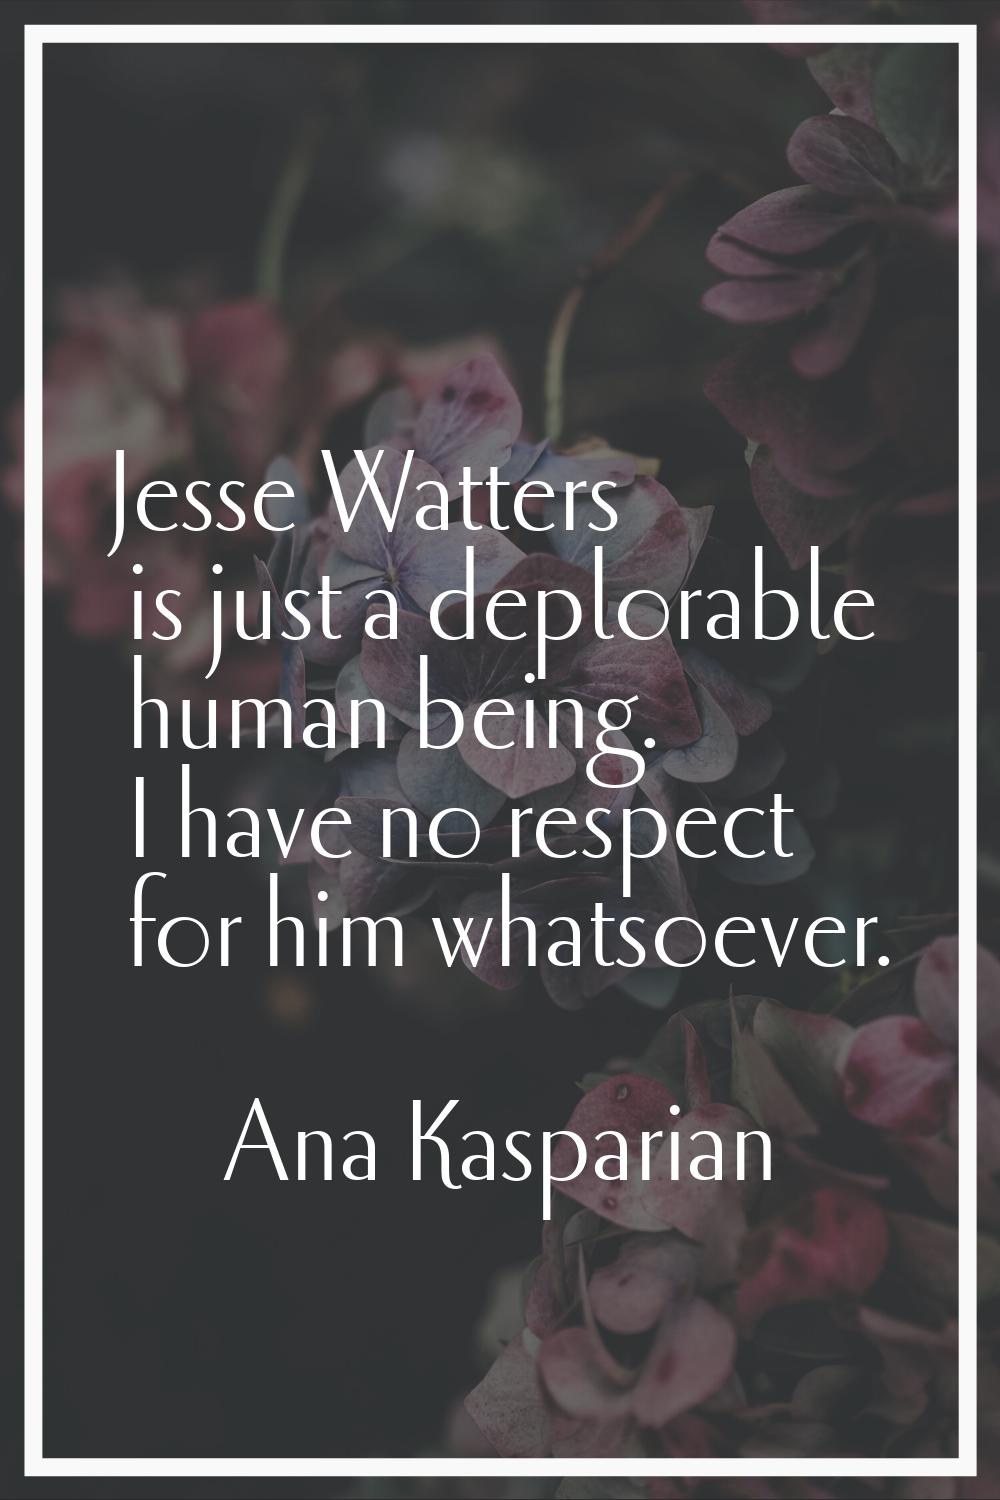 Jesse Watters is just a deplorable human being. I have no respect for him whatsoever.